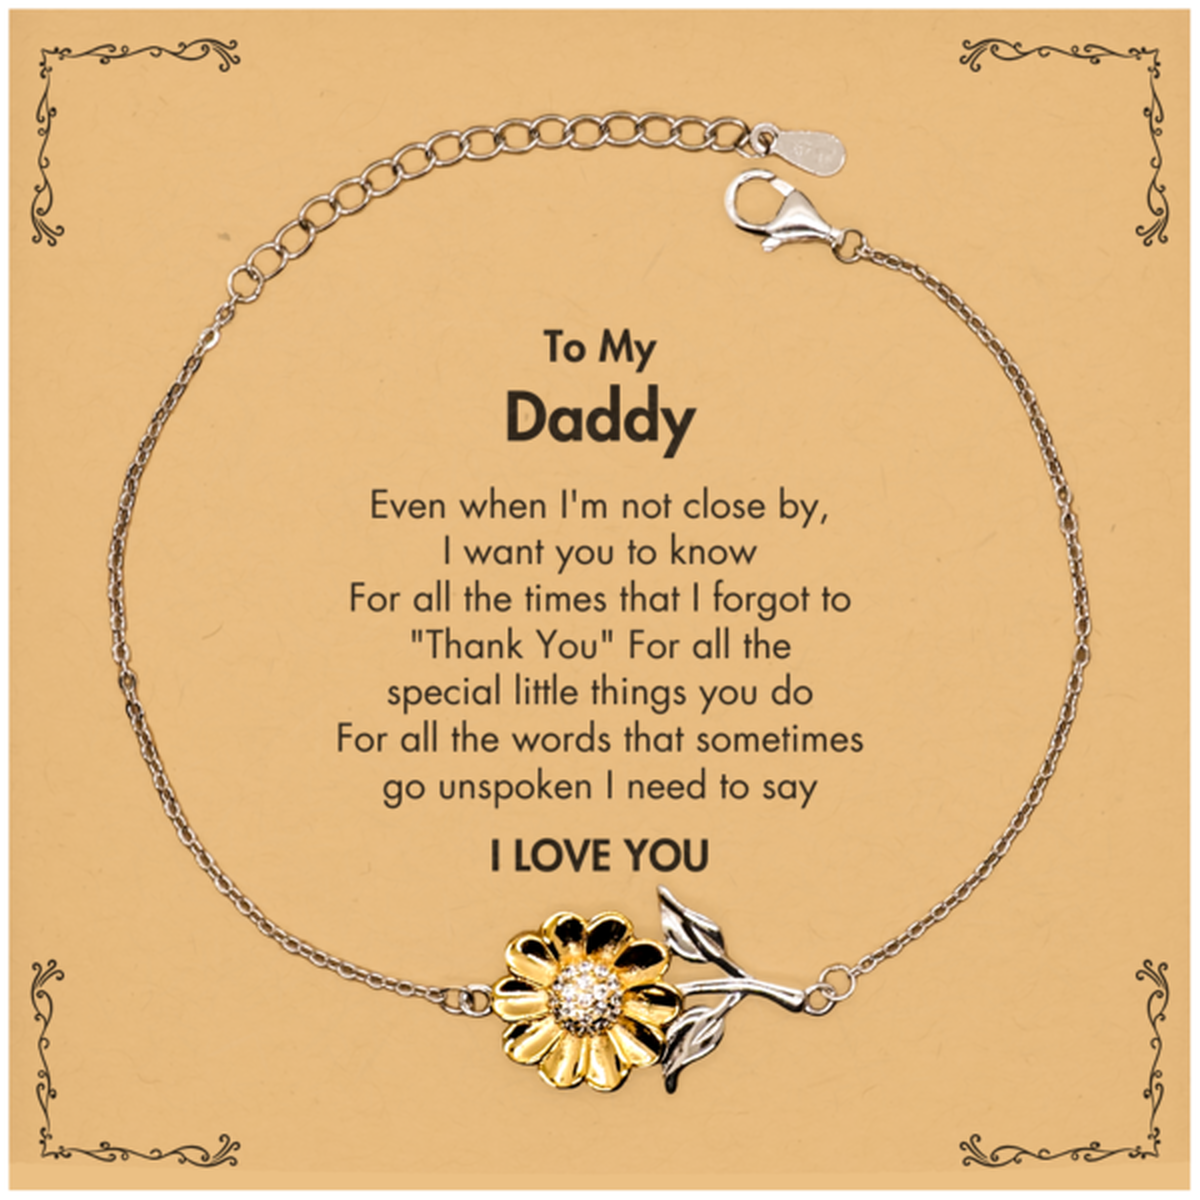 Thank You Gifts for Daddy, Keepsake Sunflower Bracelet Gifts for Daddy Birthday Mother's day Father's Day Daddy For all the words That sometimes go unspoken I need to say I LOVE YOU